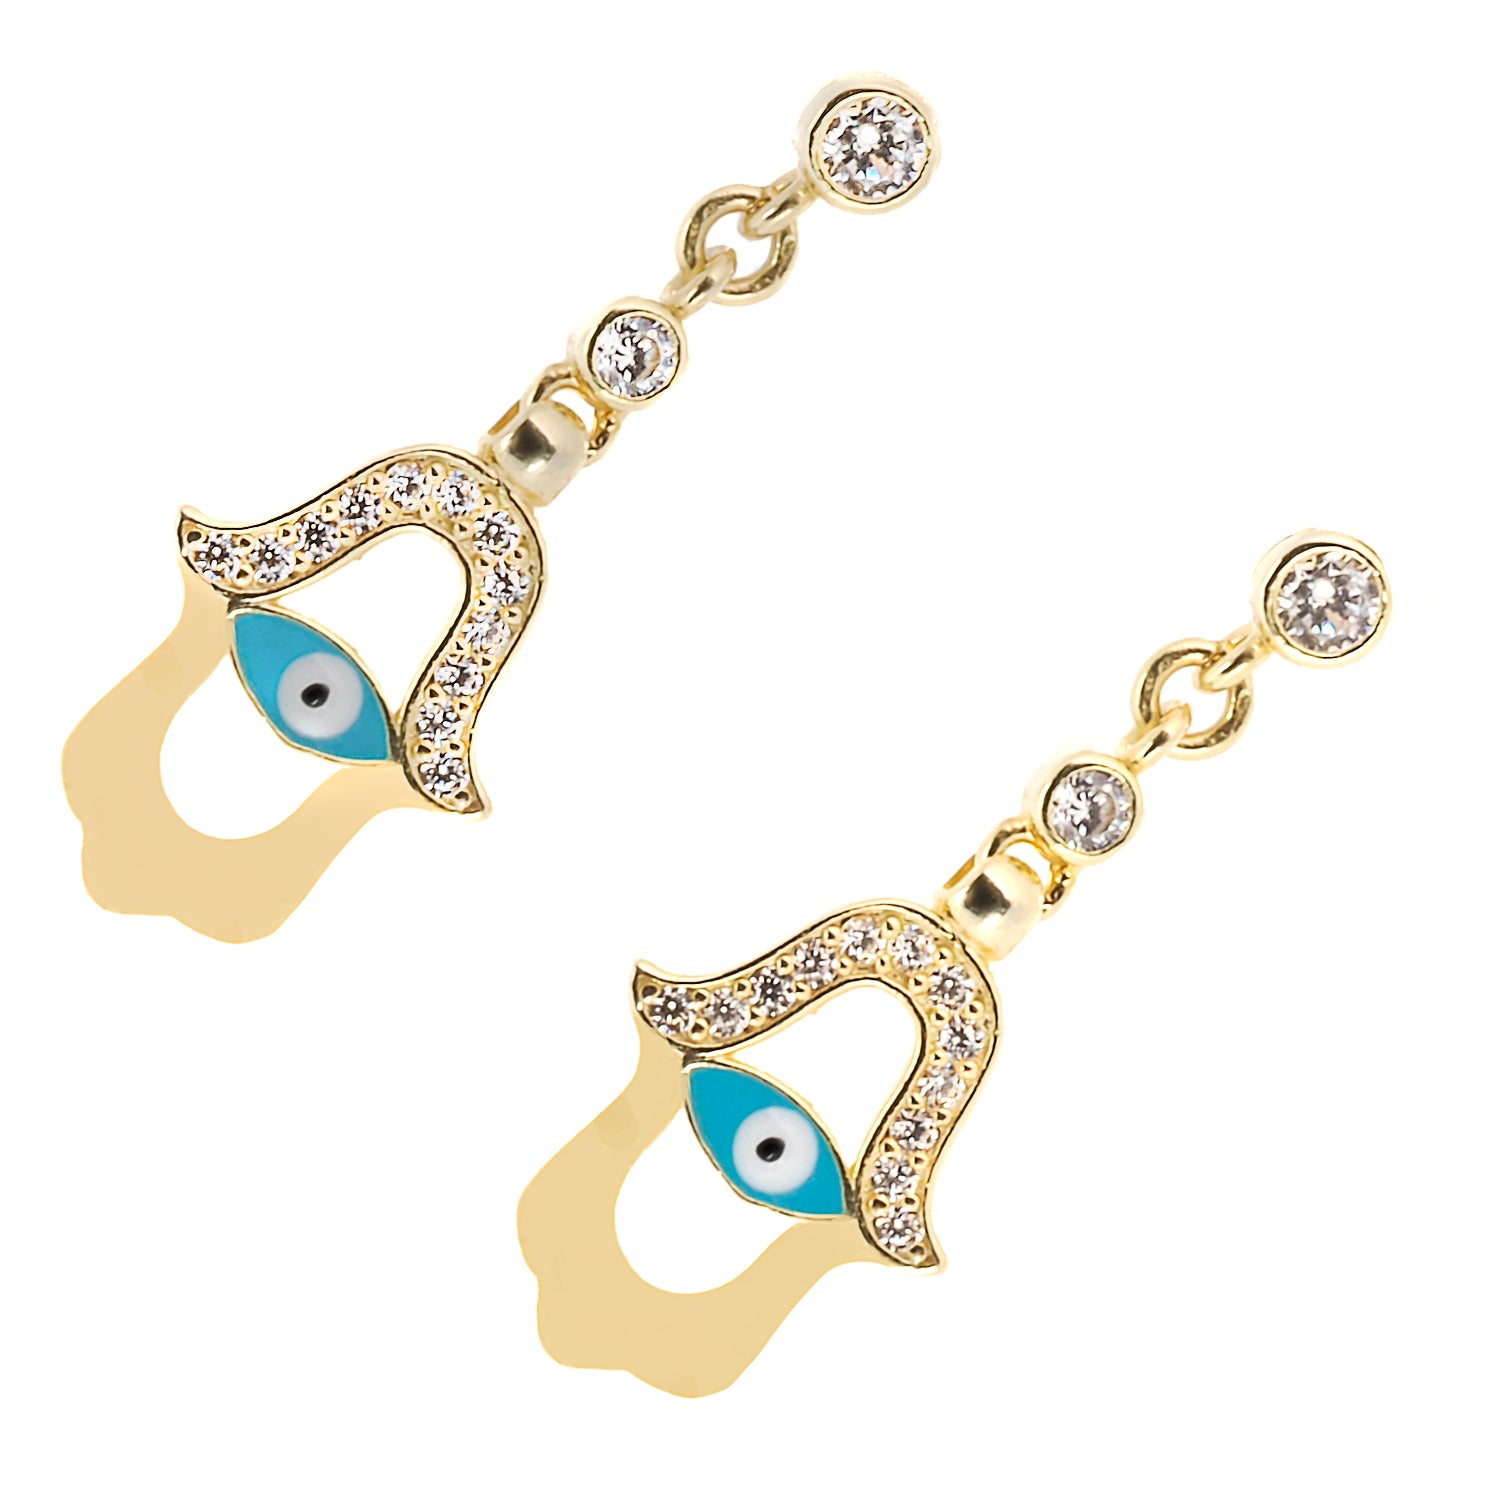 Handmade earrings featuring a unique combination of Evil Eye and Hamsa symbols in turquoise enamel and CZ diamonds